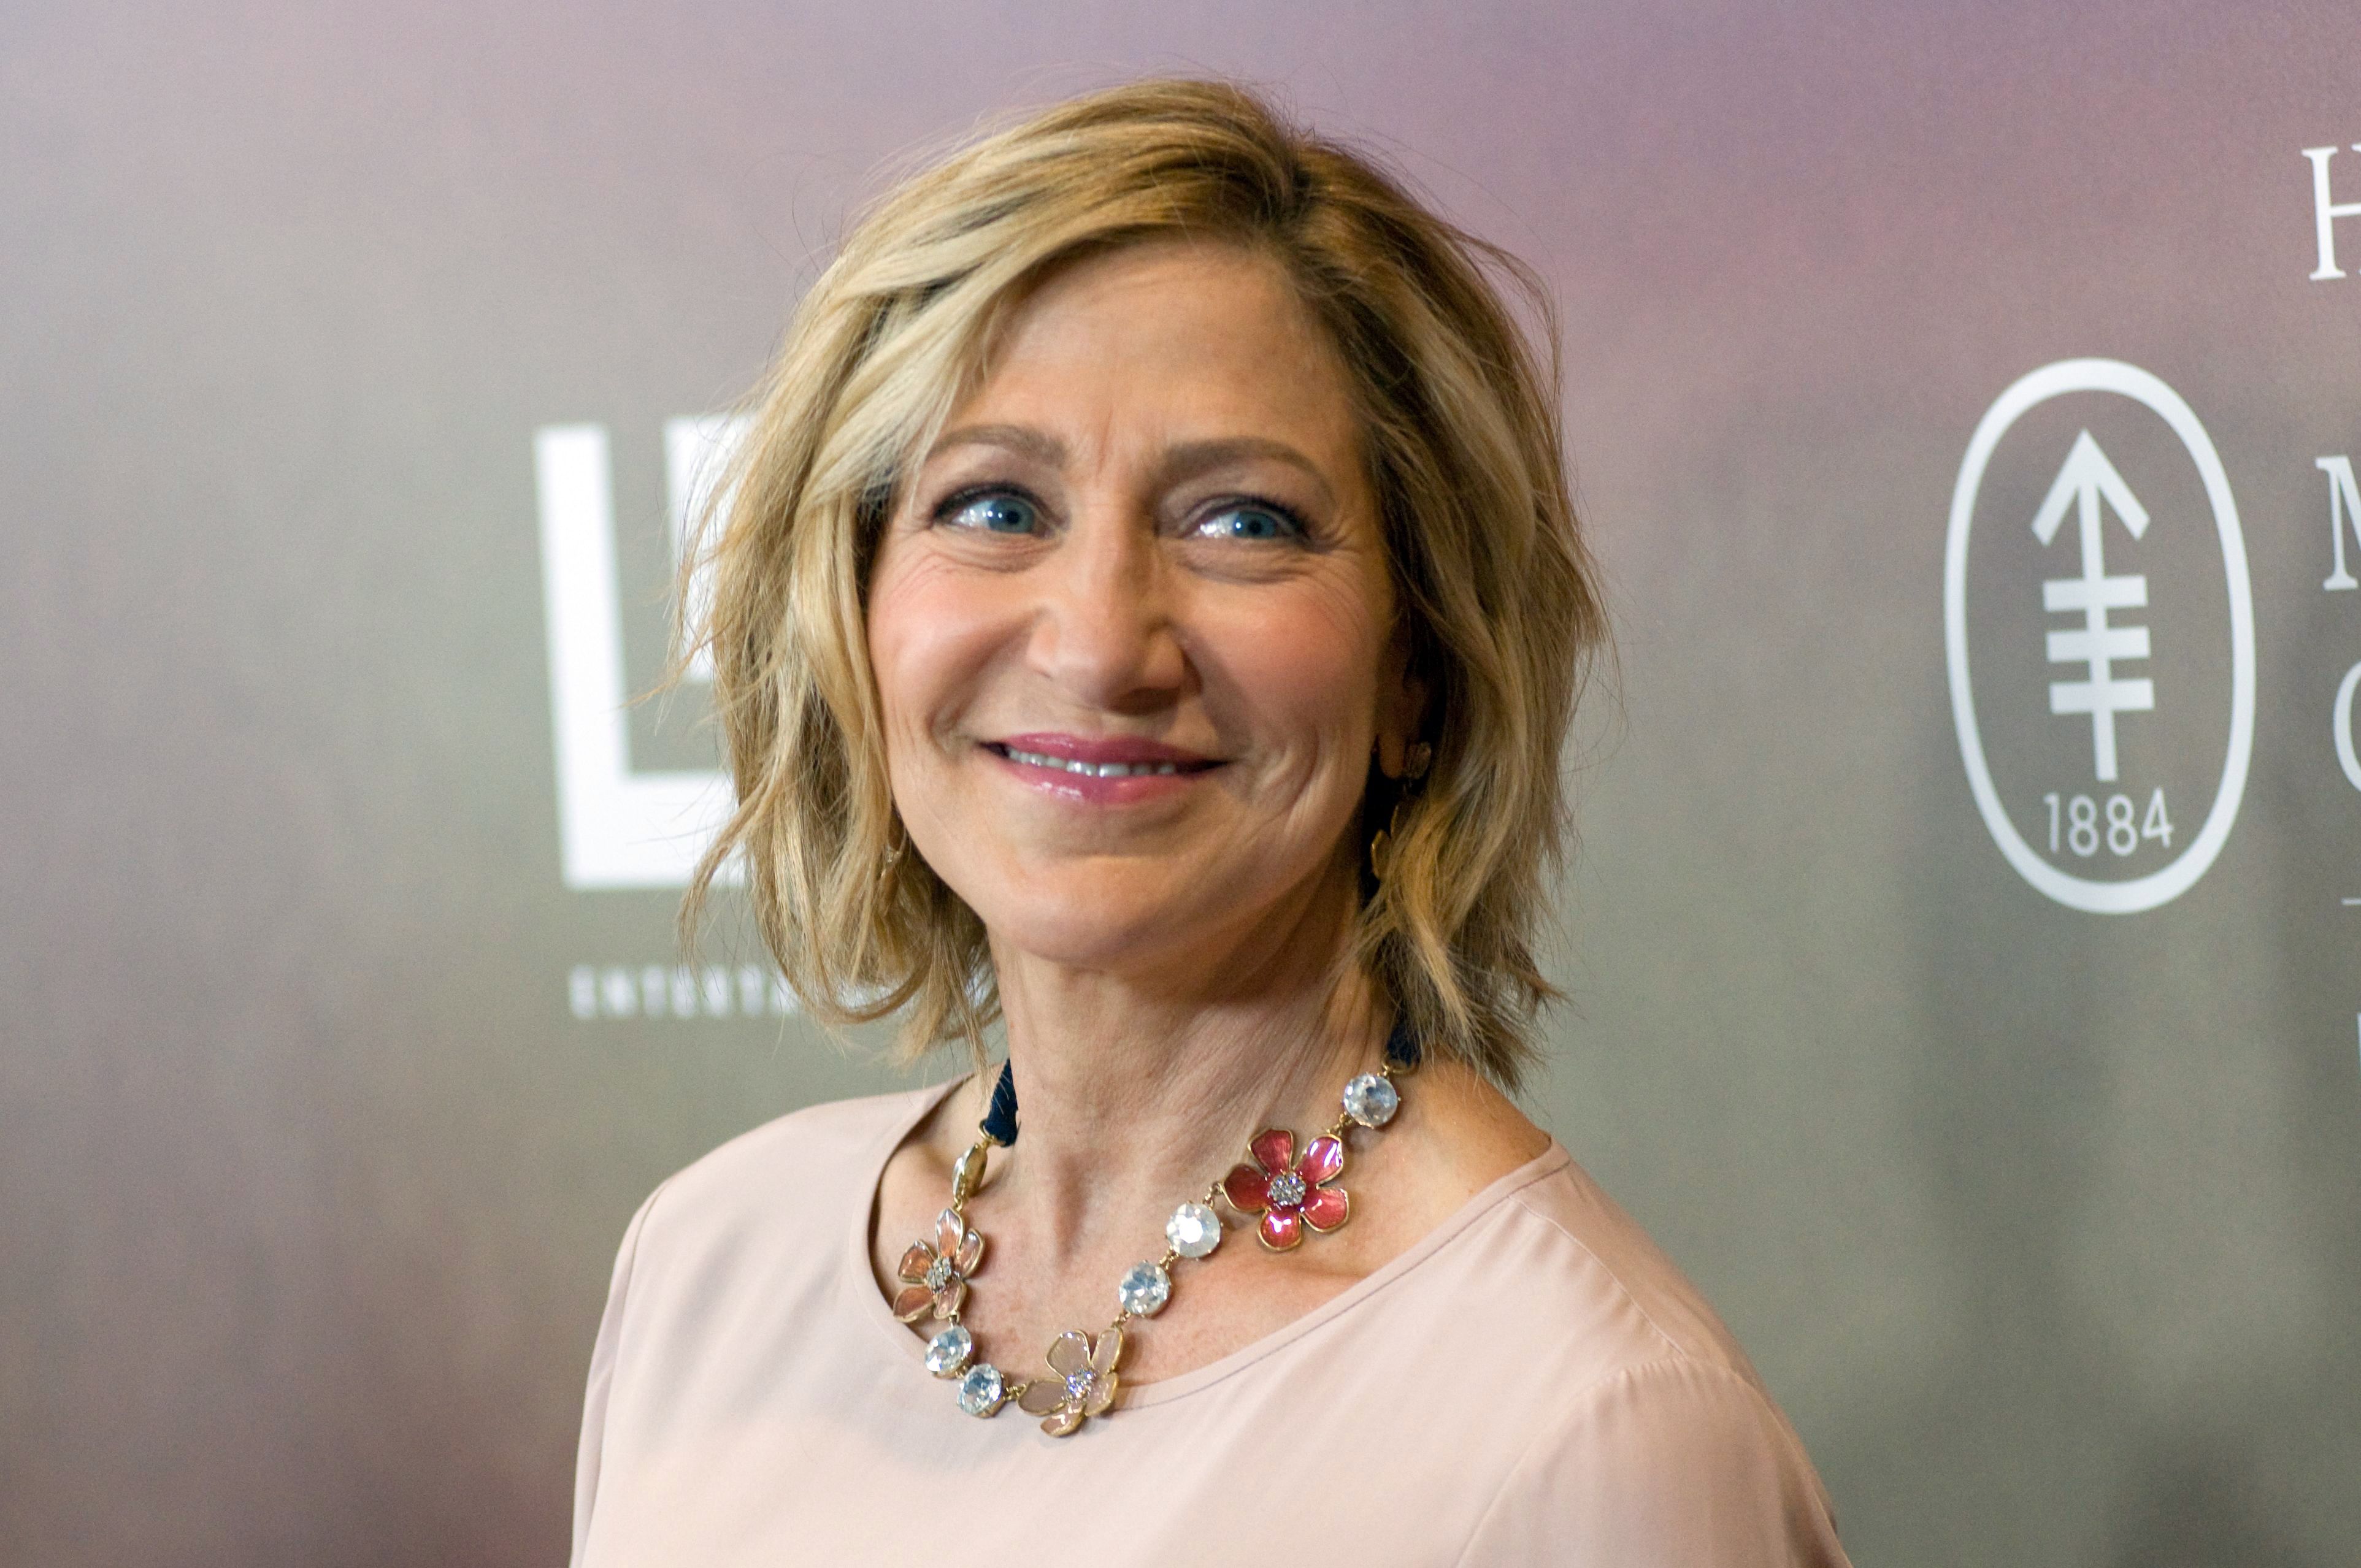 CBS Picks Up "Tommy" Starring Edie Falco.